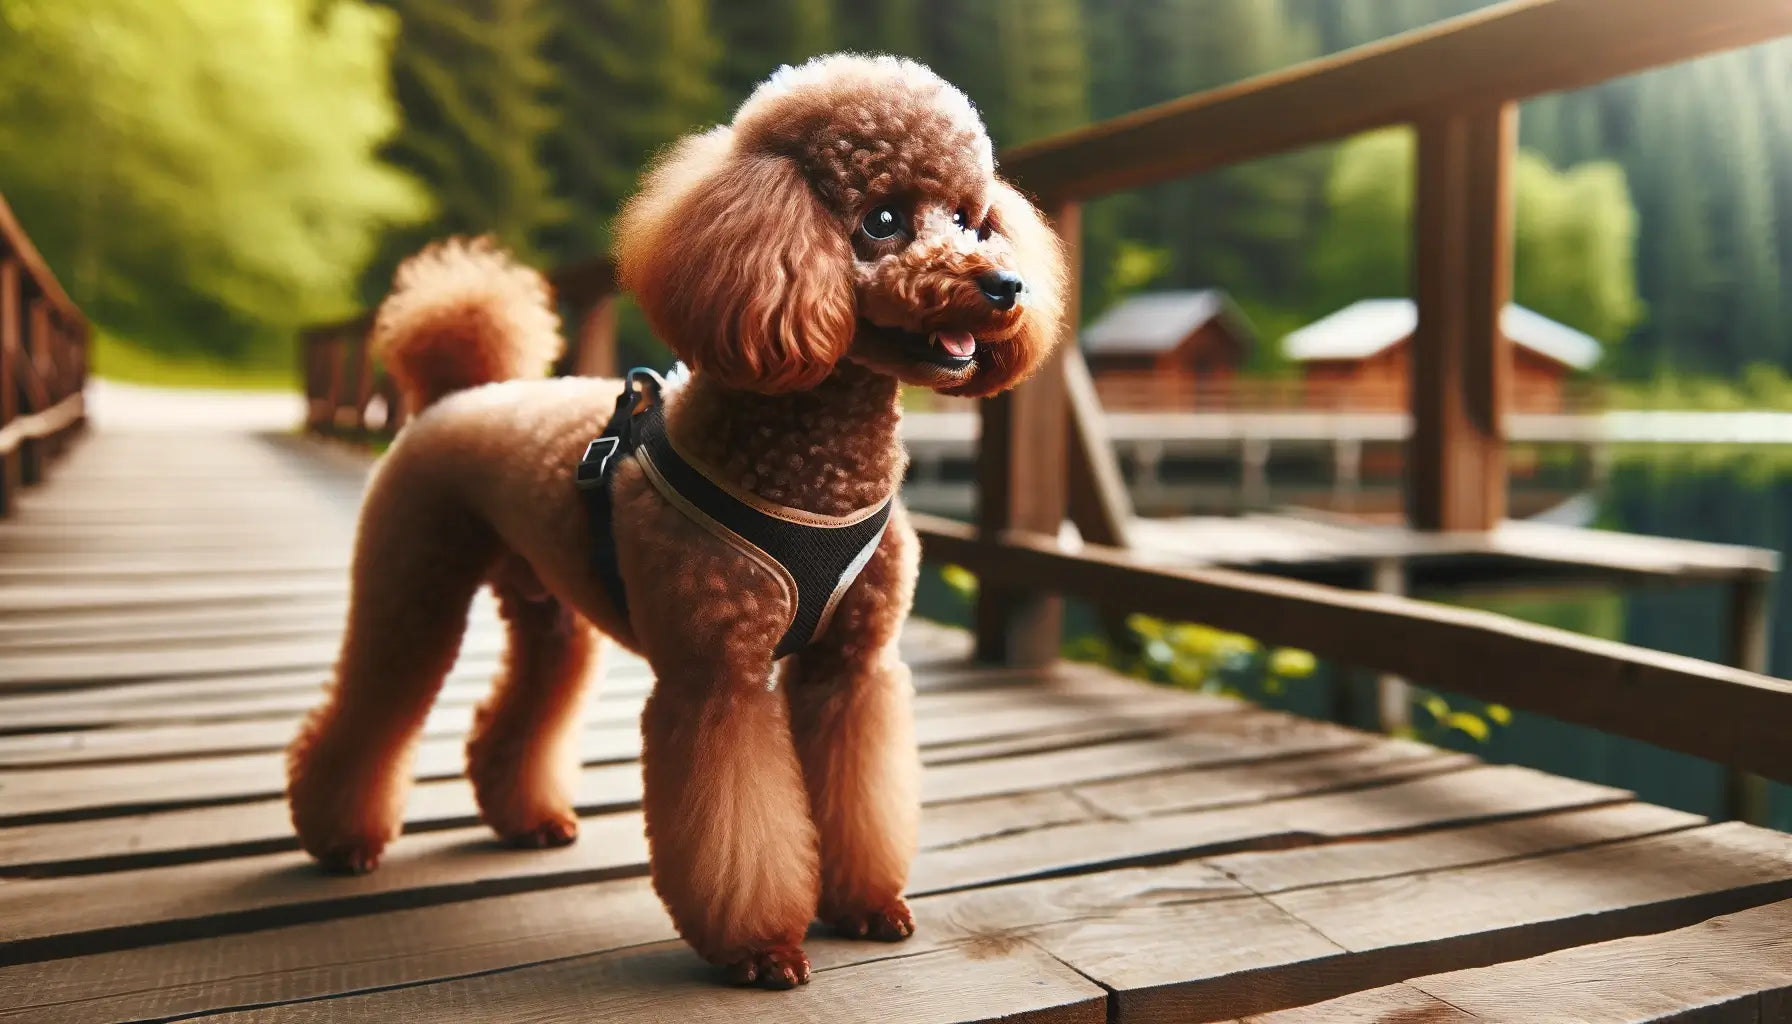 A brown Poodle standing on a wooden surface outdoors, wearing a harness, ready for a walk.